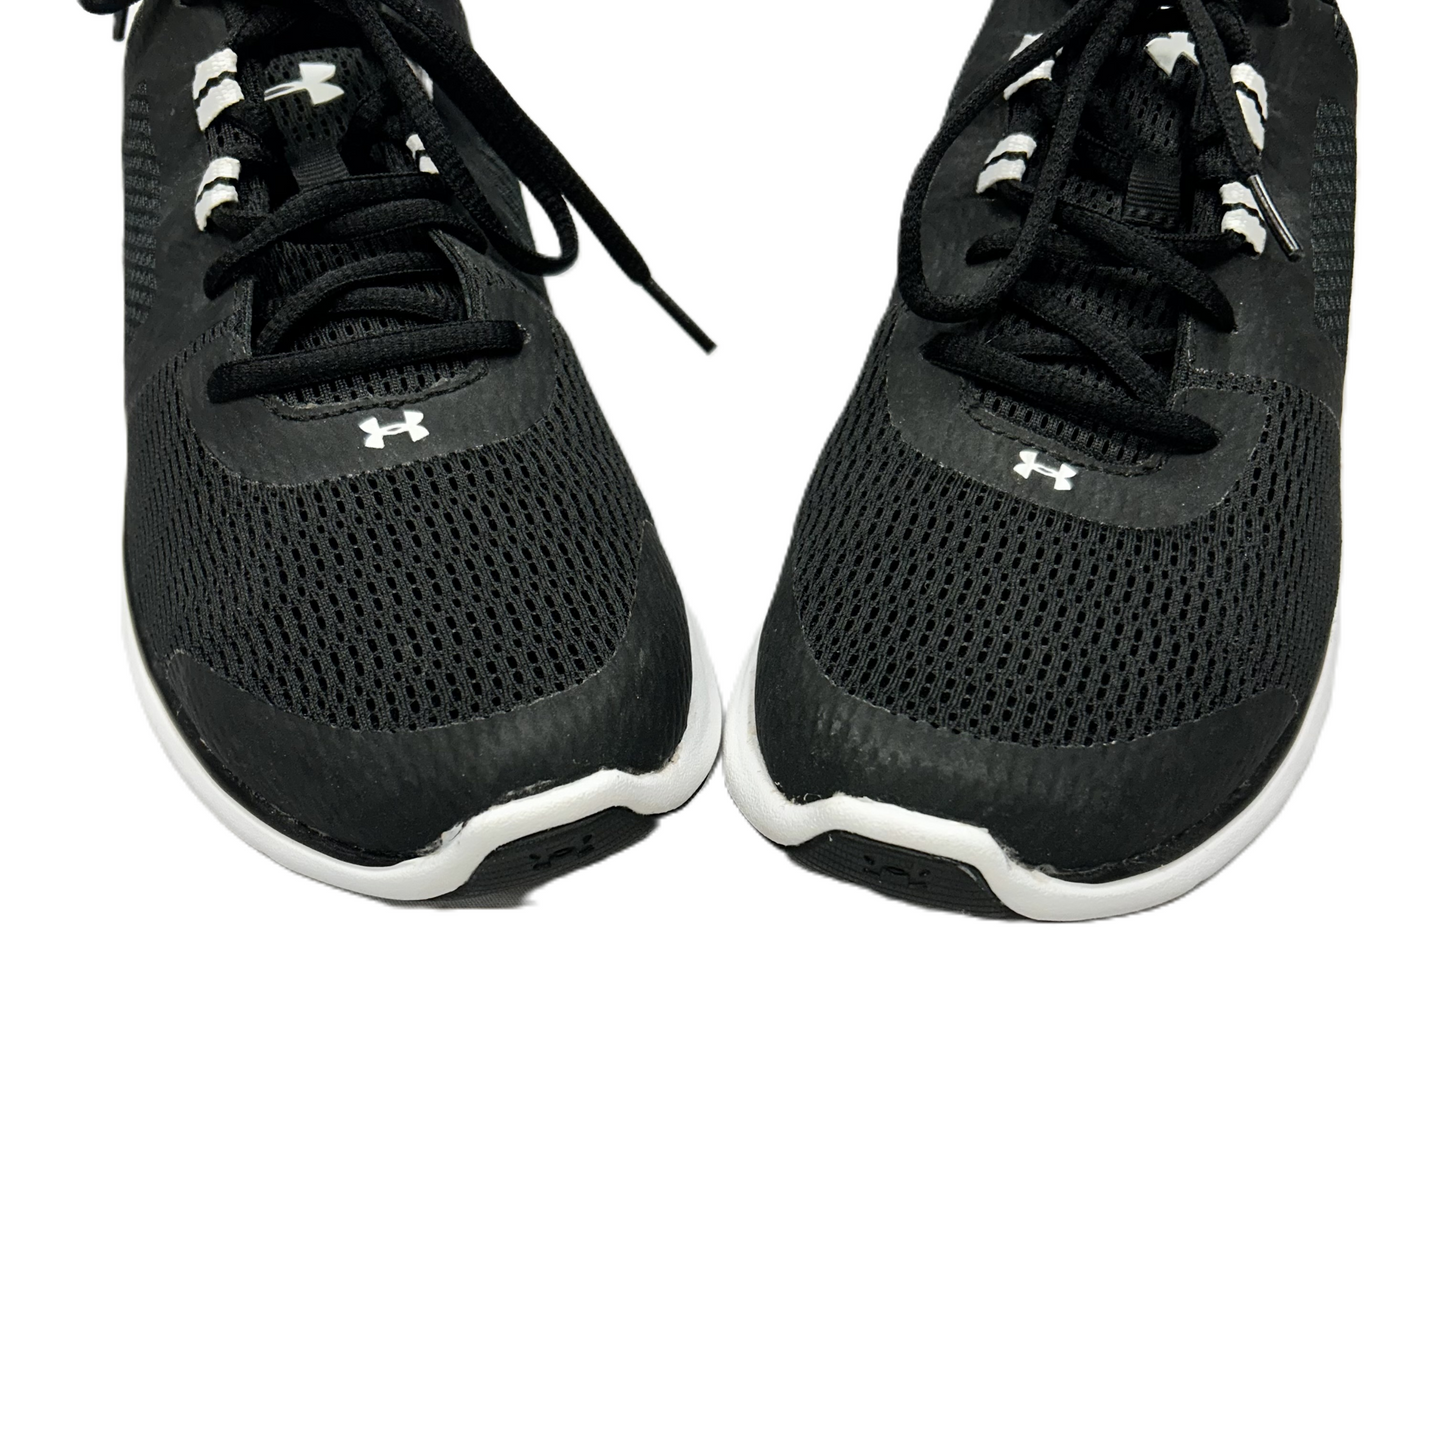 Black & White Shoes Athletic By Under Armour, Size: 10